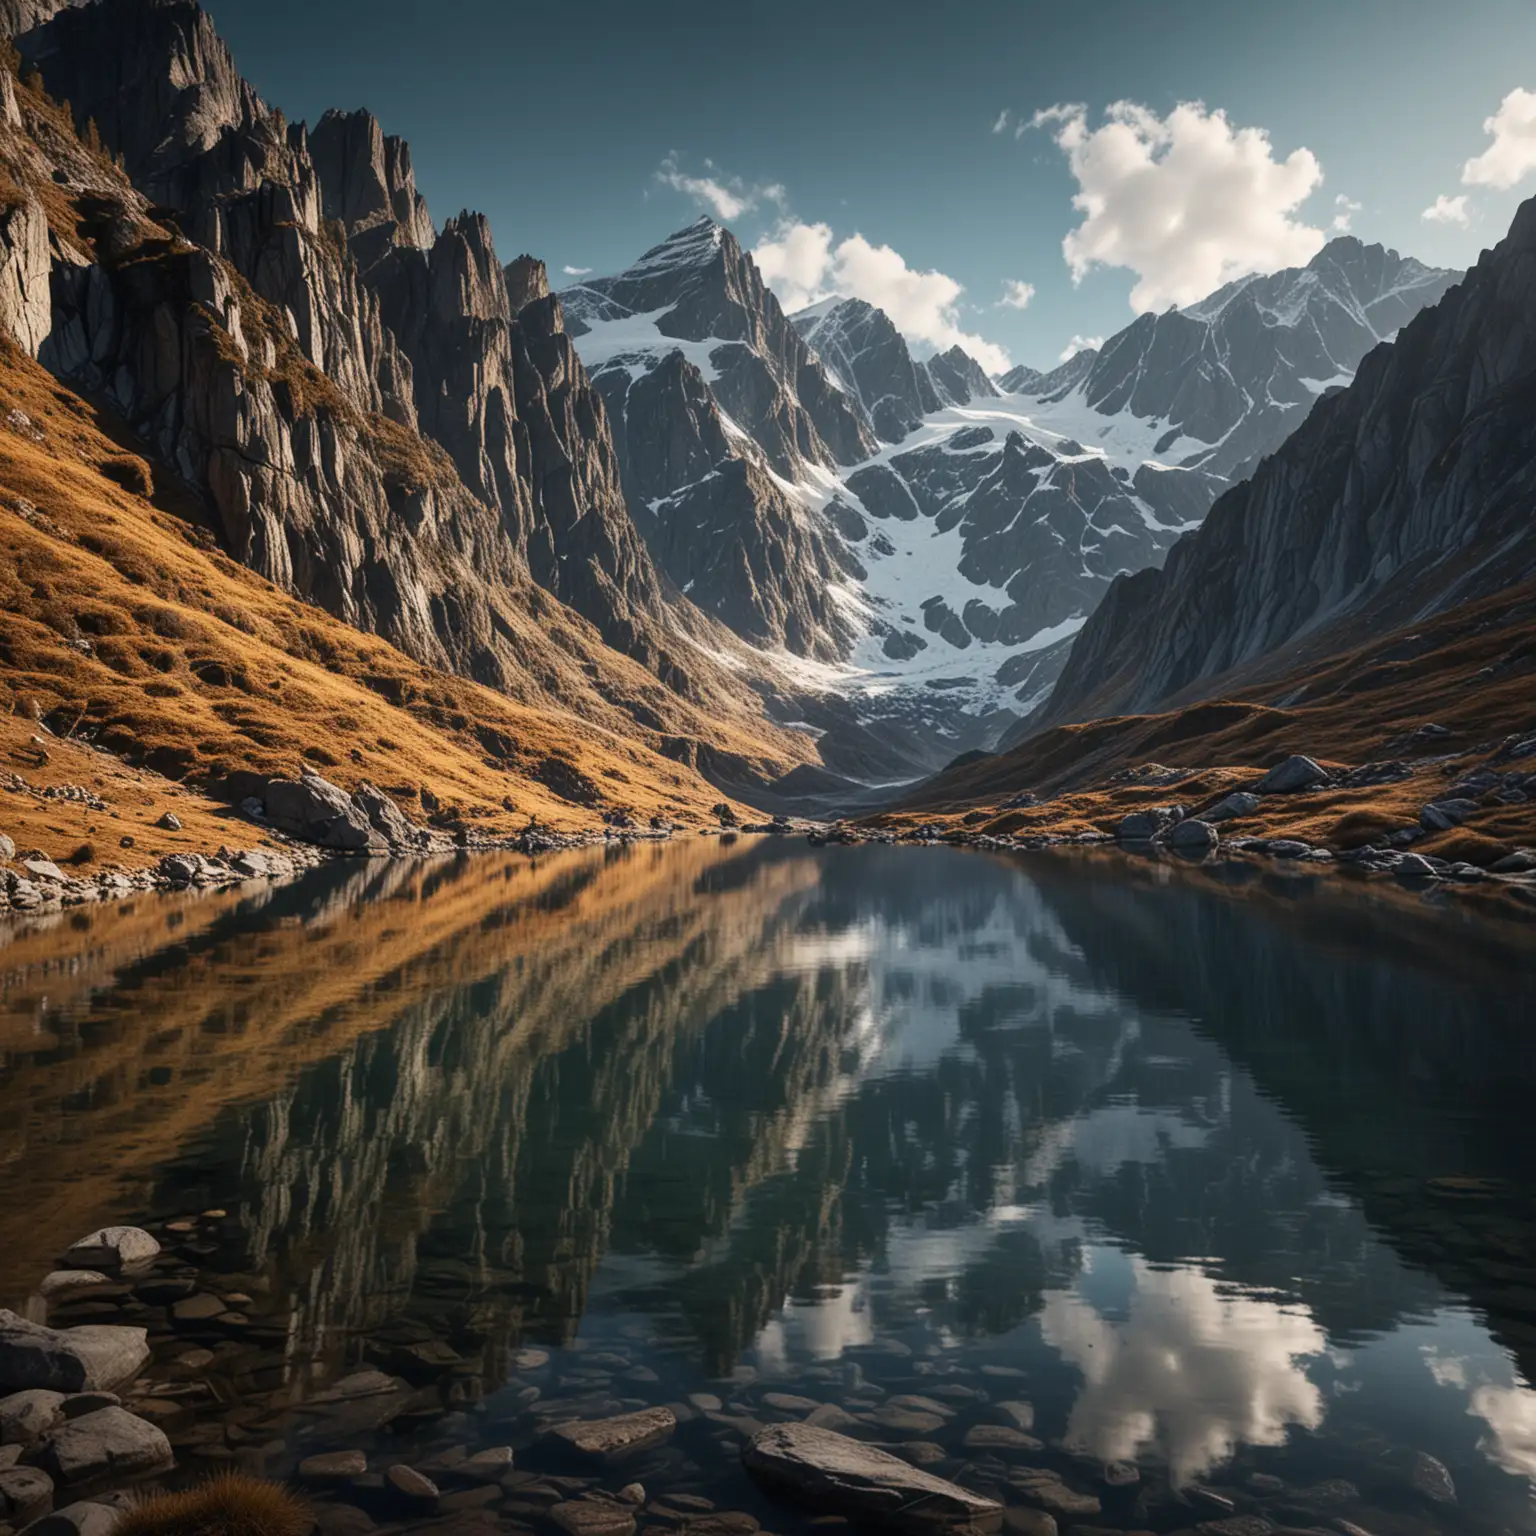 Immerse yourself in the breathtaking beauty of high mountains, captivated by the rich details and perfect composition of this high-quality, high-definition 8K shot of High mountains, rich details, perfect composition, high quality, high-definition, 8K, lake, reflections, photorealistic, nature photography